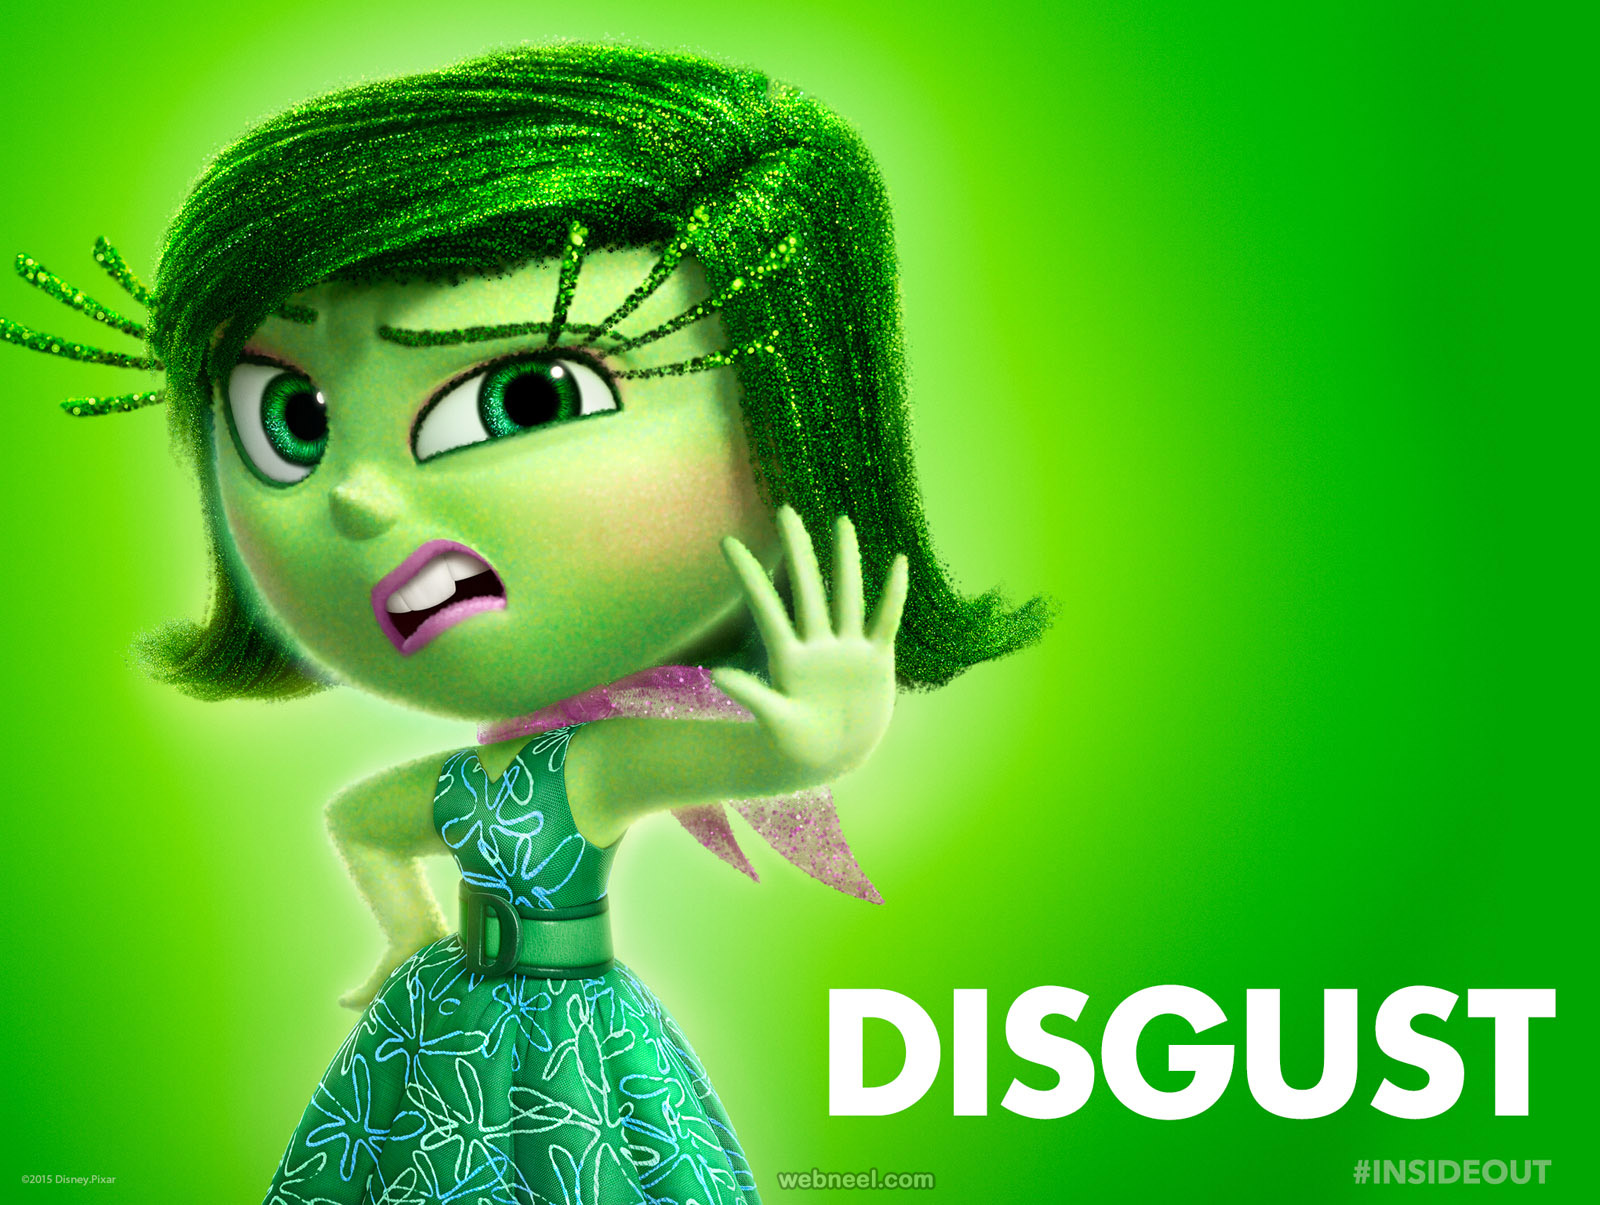 disney inside out characters disgust